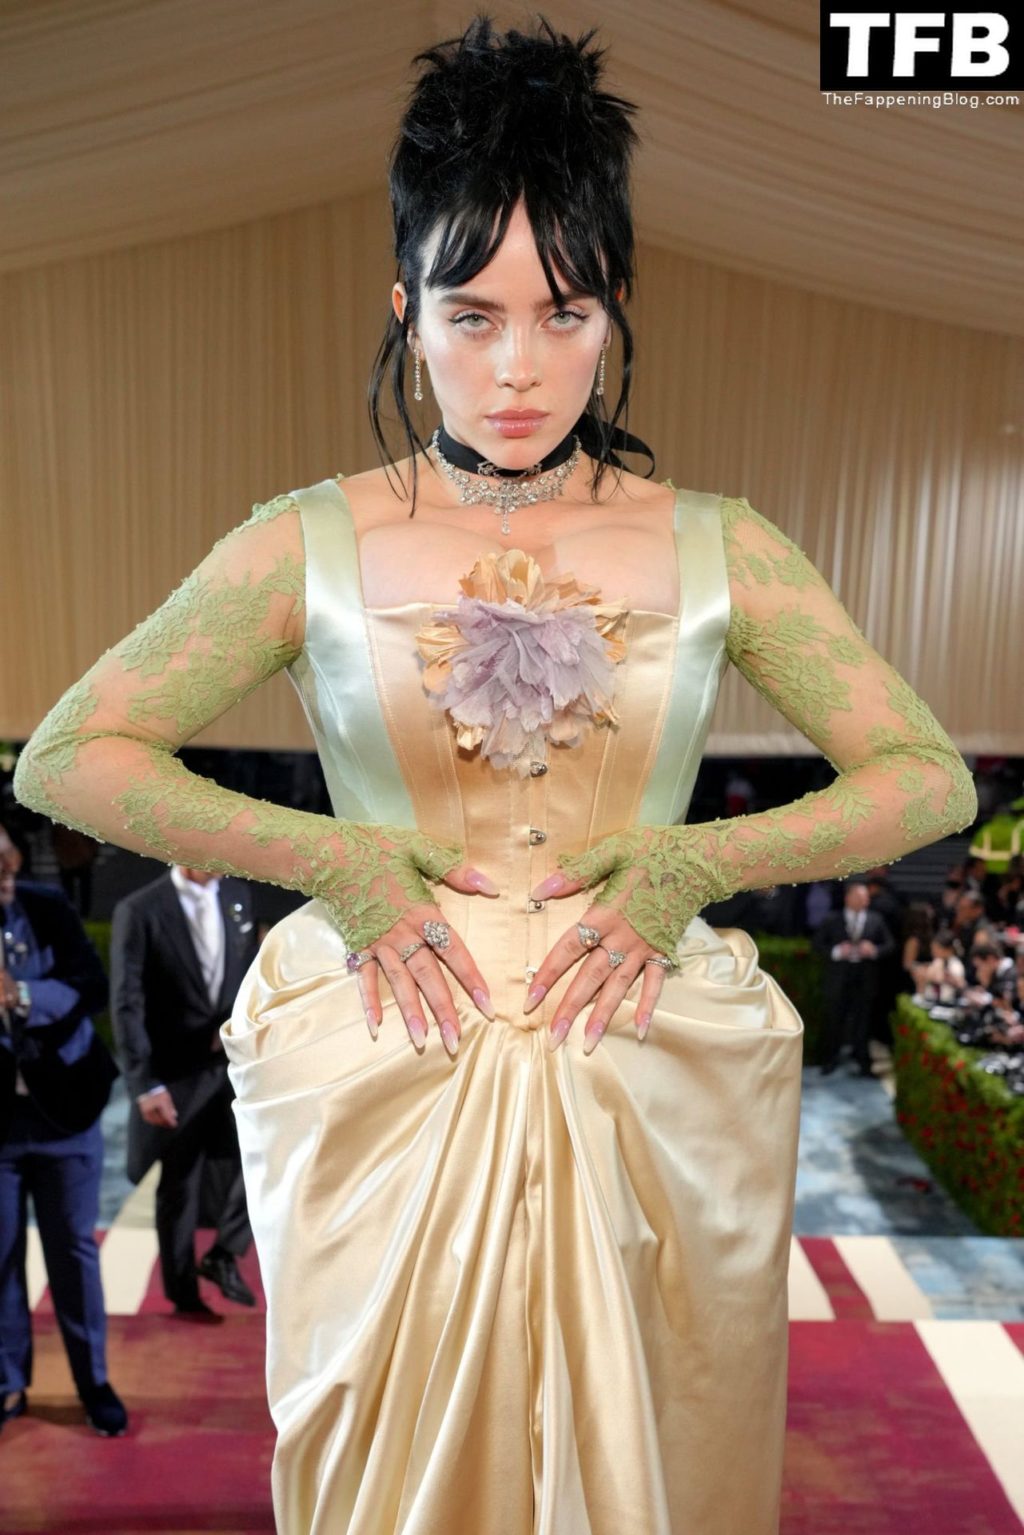 Billie Eilish Sexy The Fappening Blog 71 1024x1535 - Billie Eilish Showcases Nice Cleavage at The 2022 Met Gala in NYC (155 Photos)